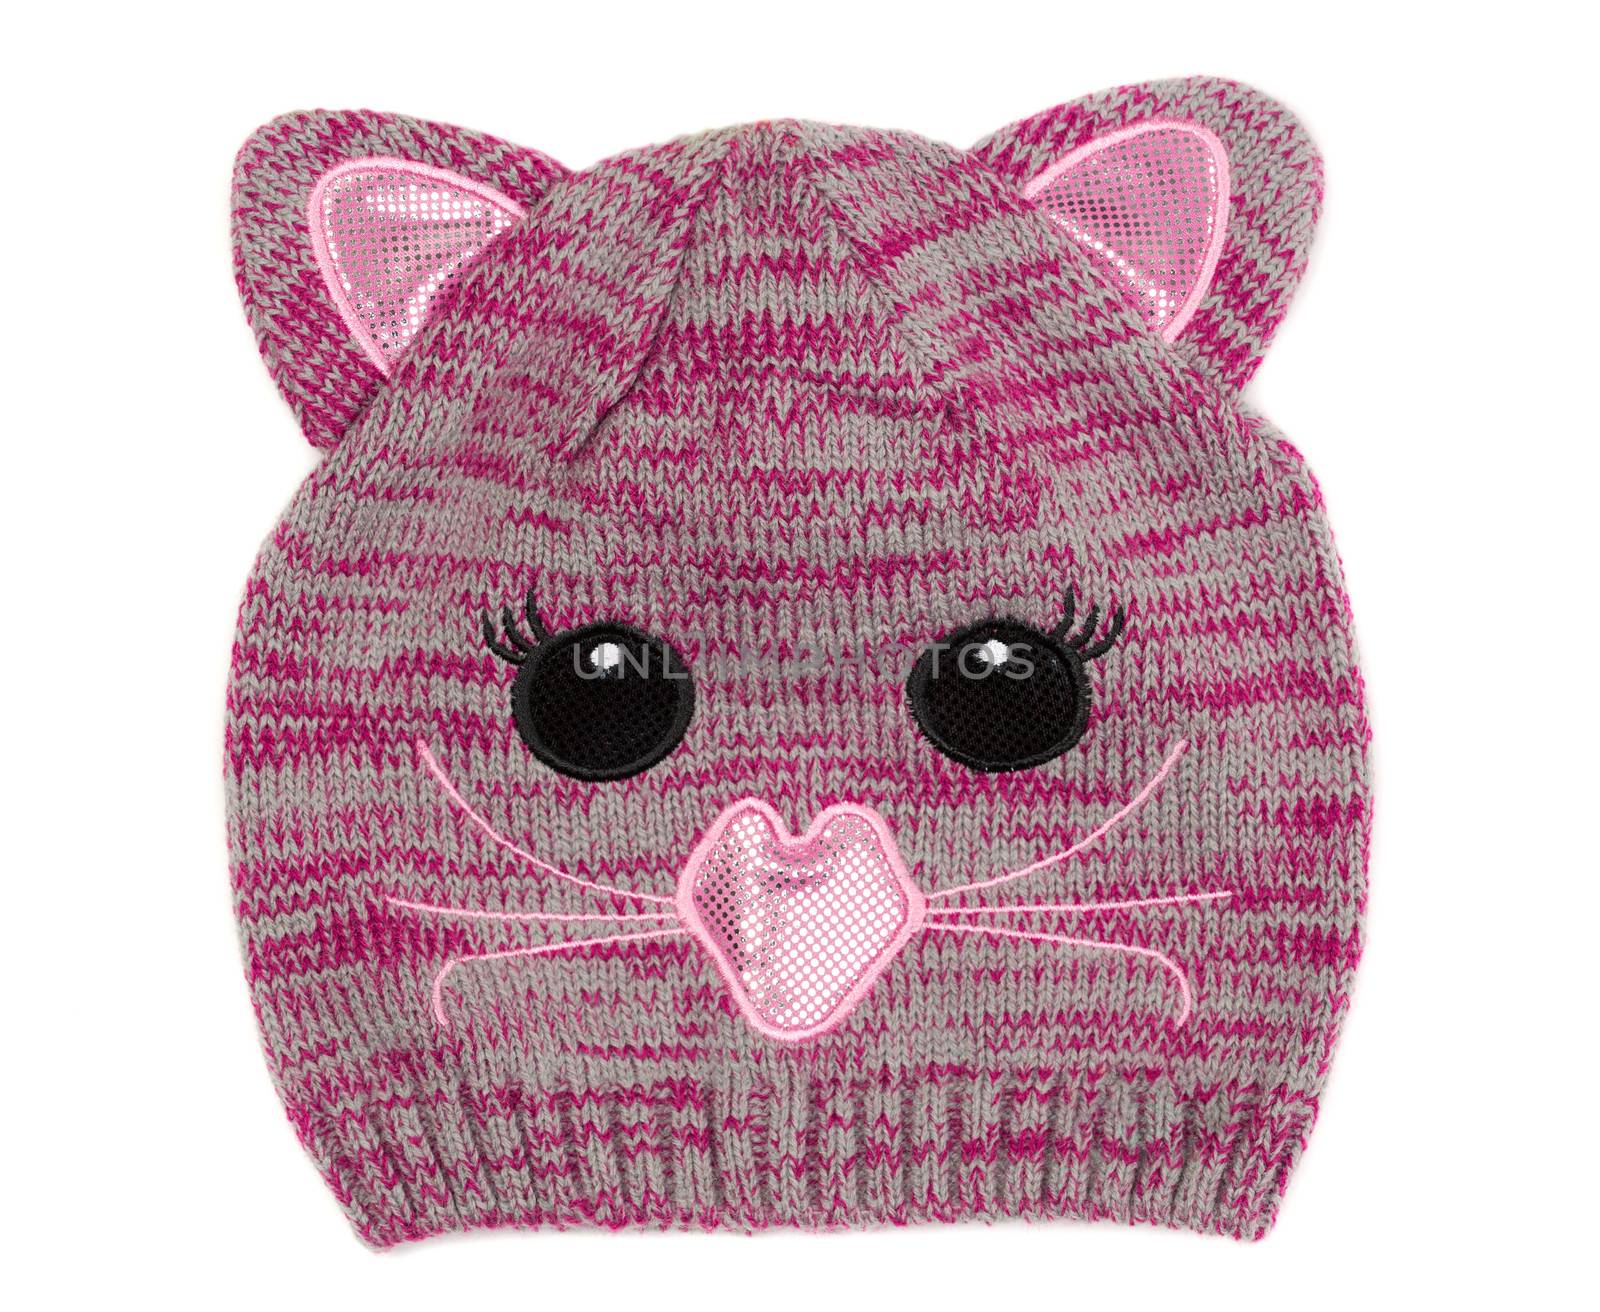 Children's knitted hat with pattern muzzle by RuslanOmega